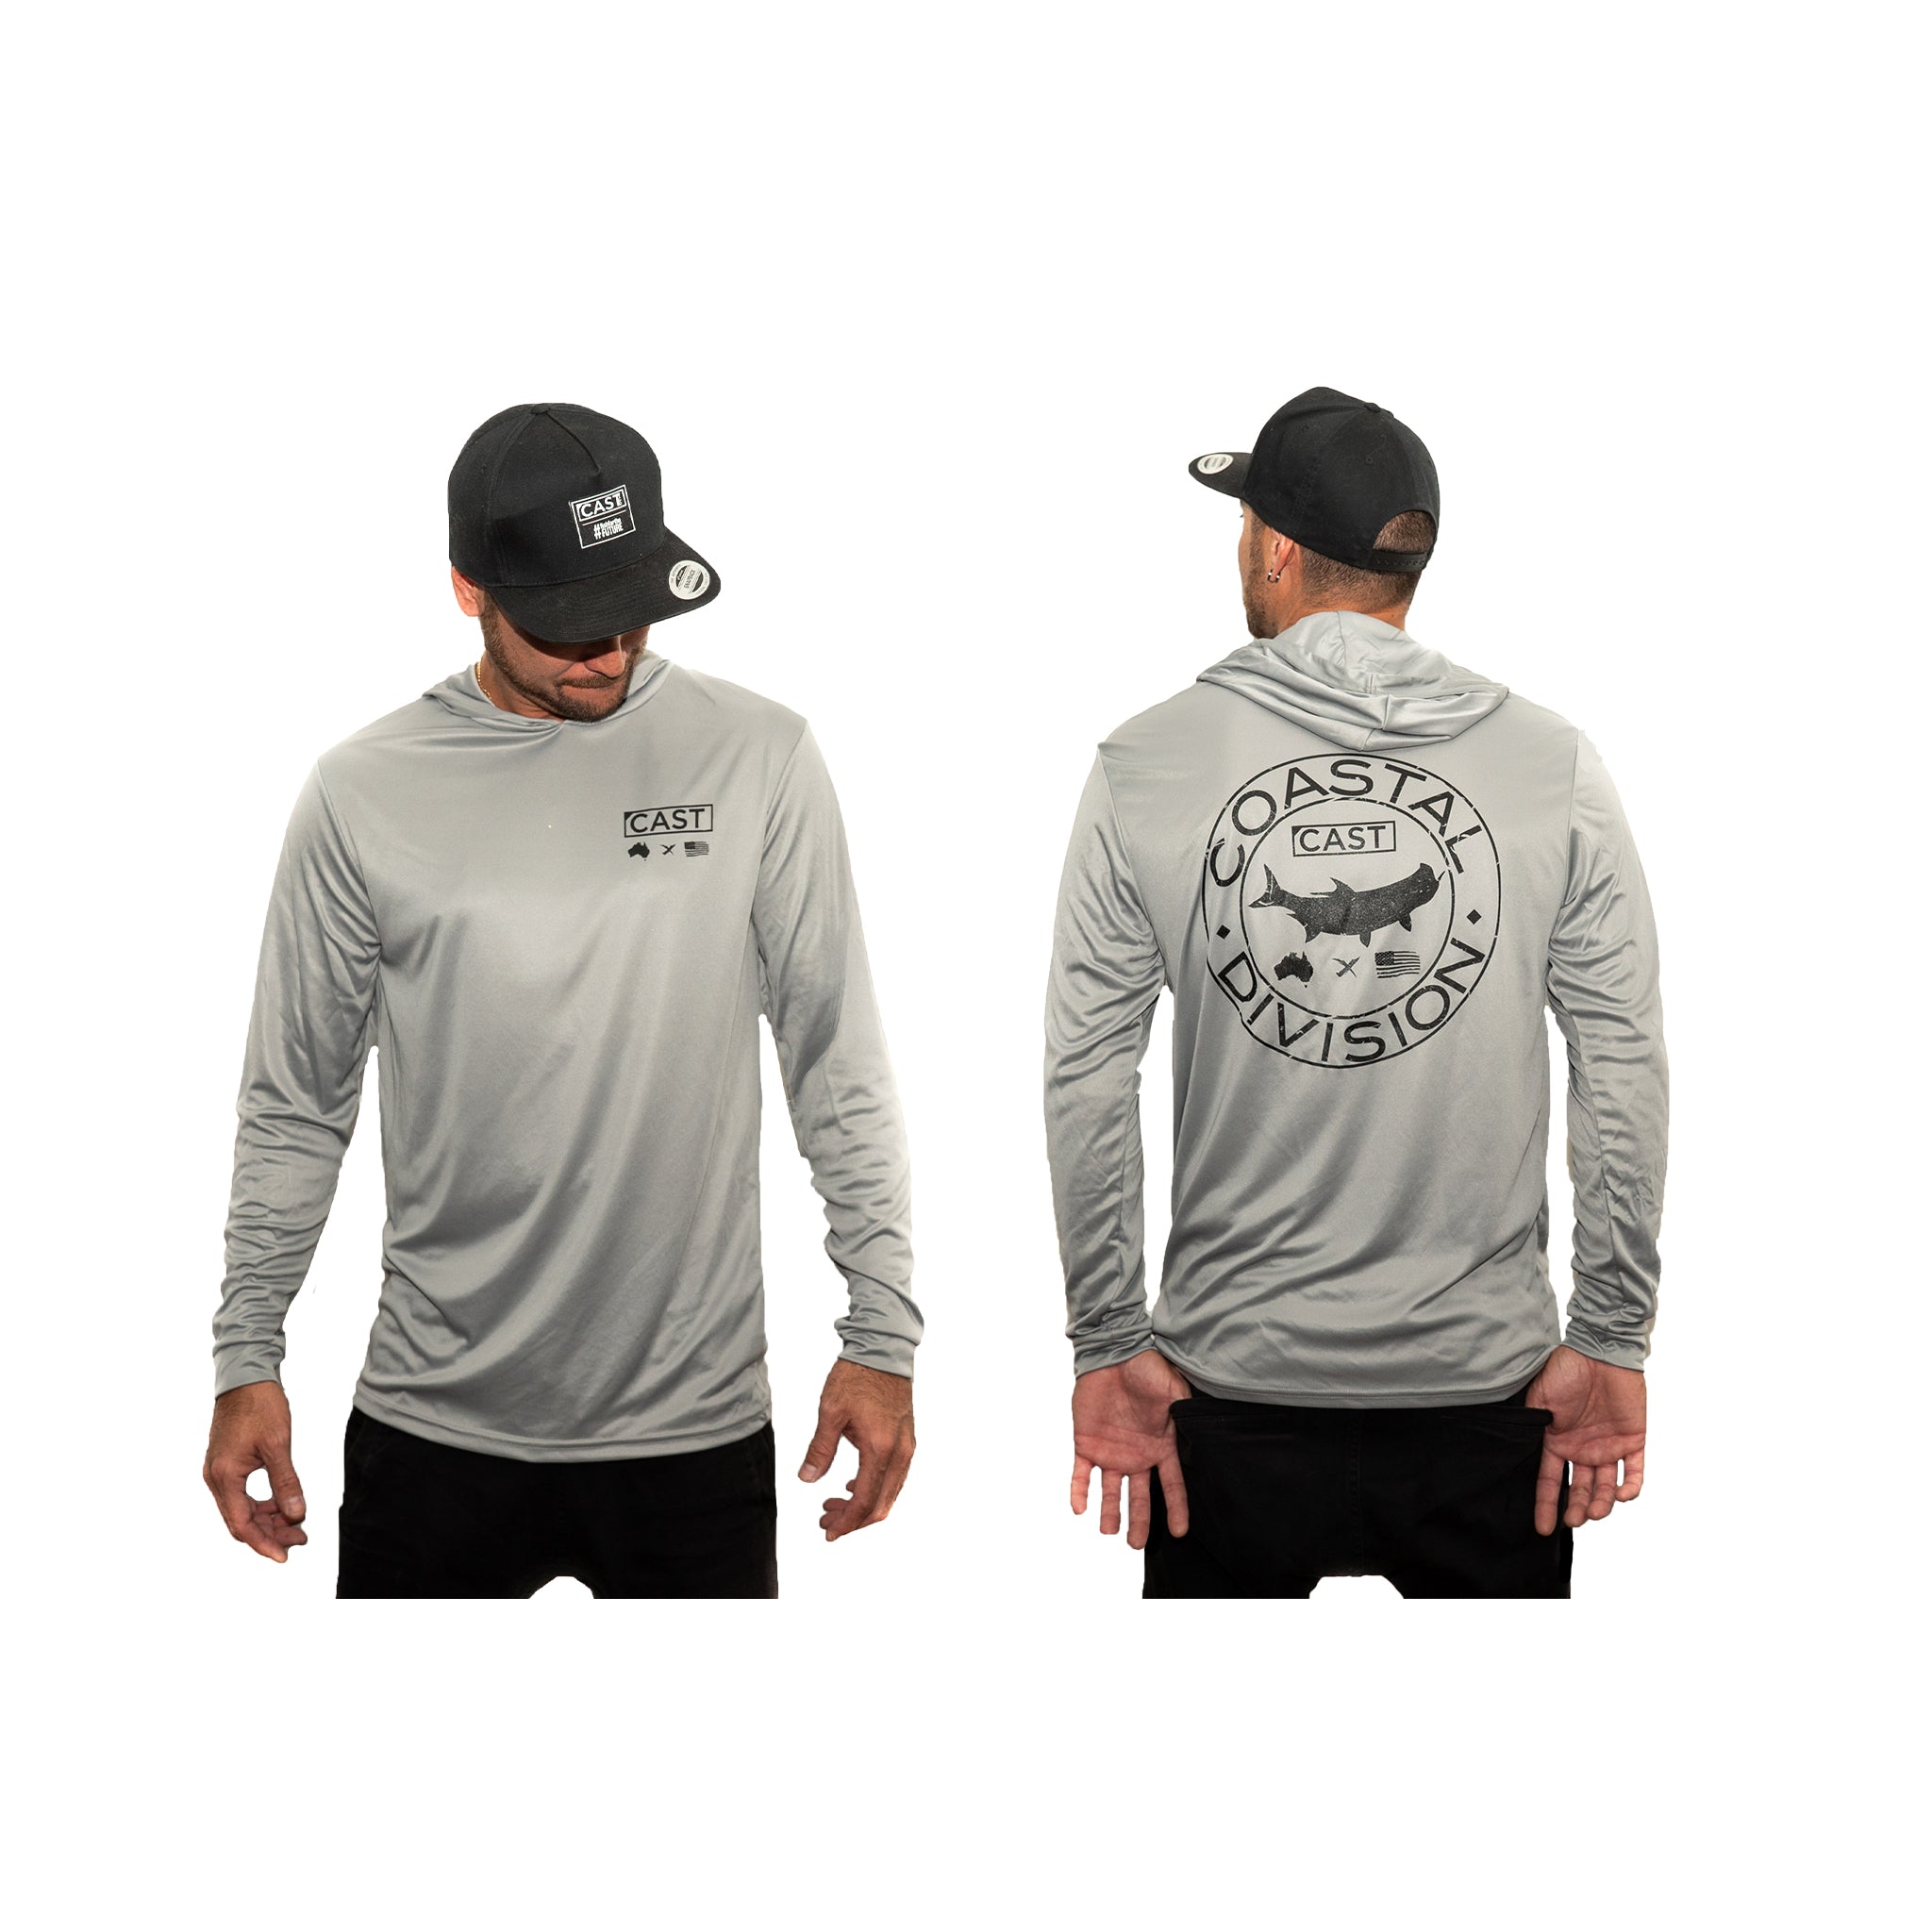 Cast Fishing Co Lightweight HOODED Performance Shirt - Coastal Division